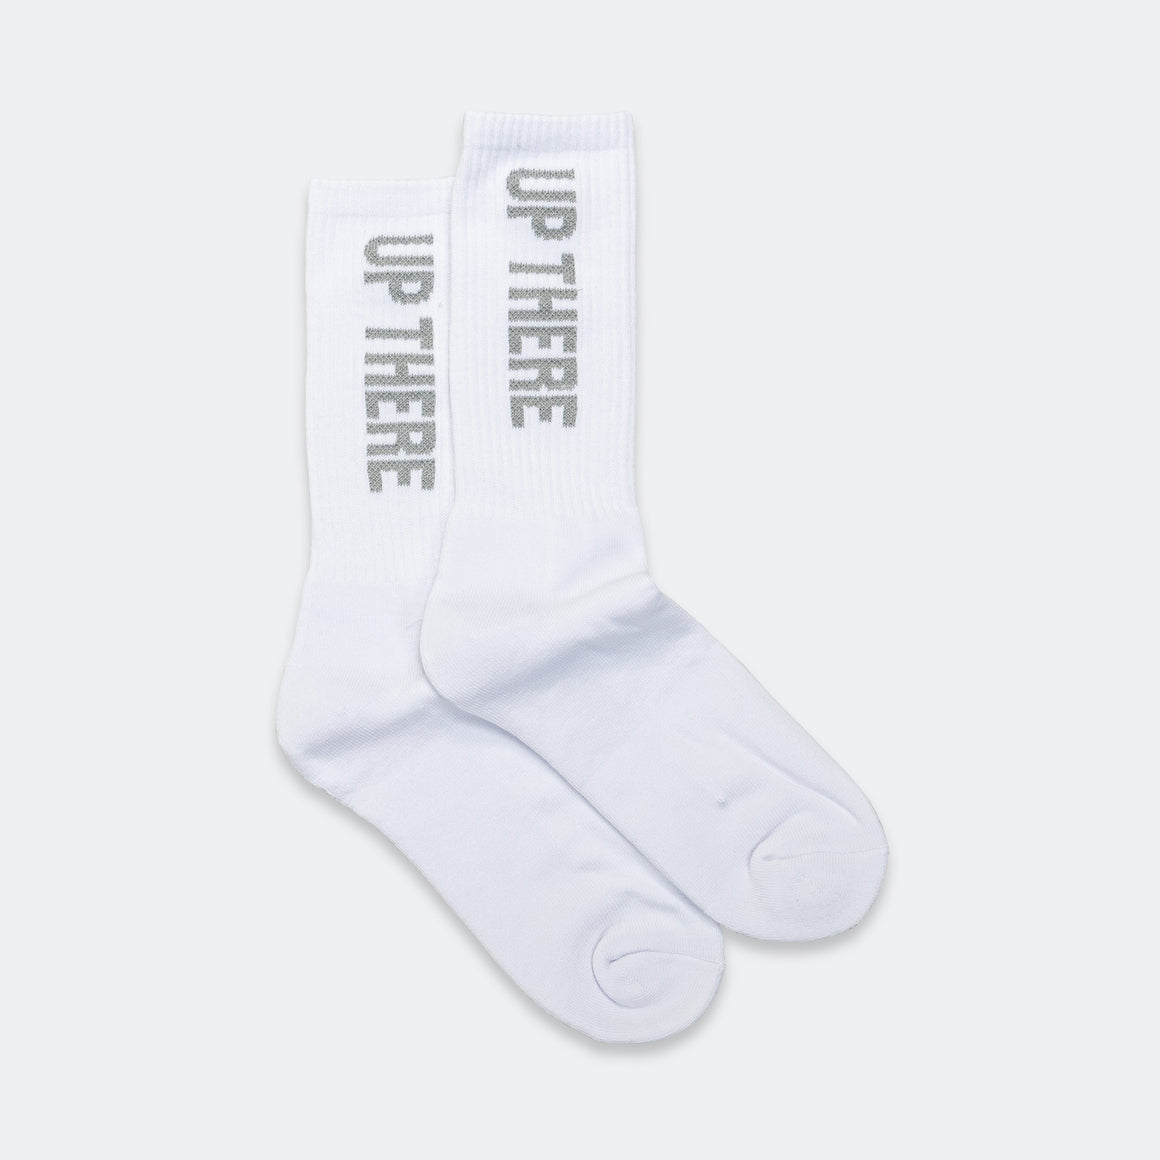 UP THERE - Reflective Logo Socks - White - UP THERE